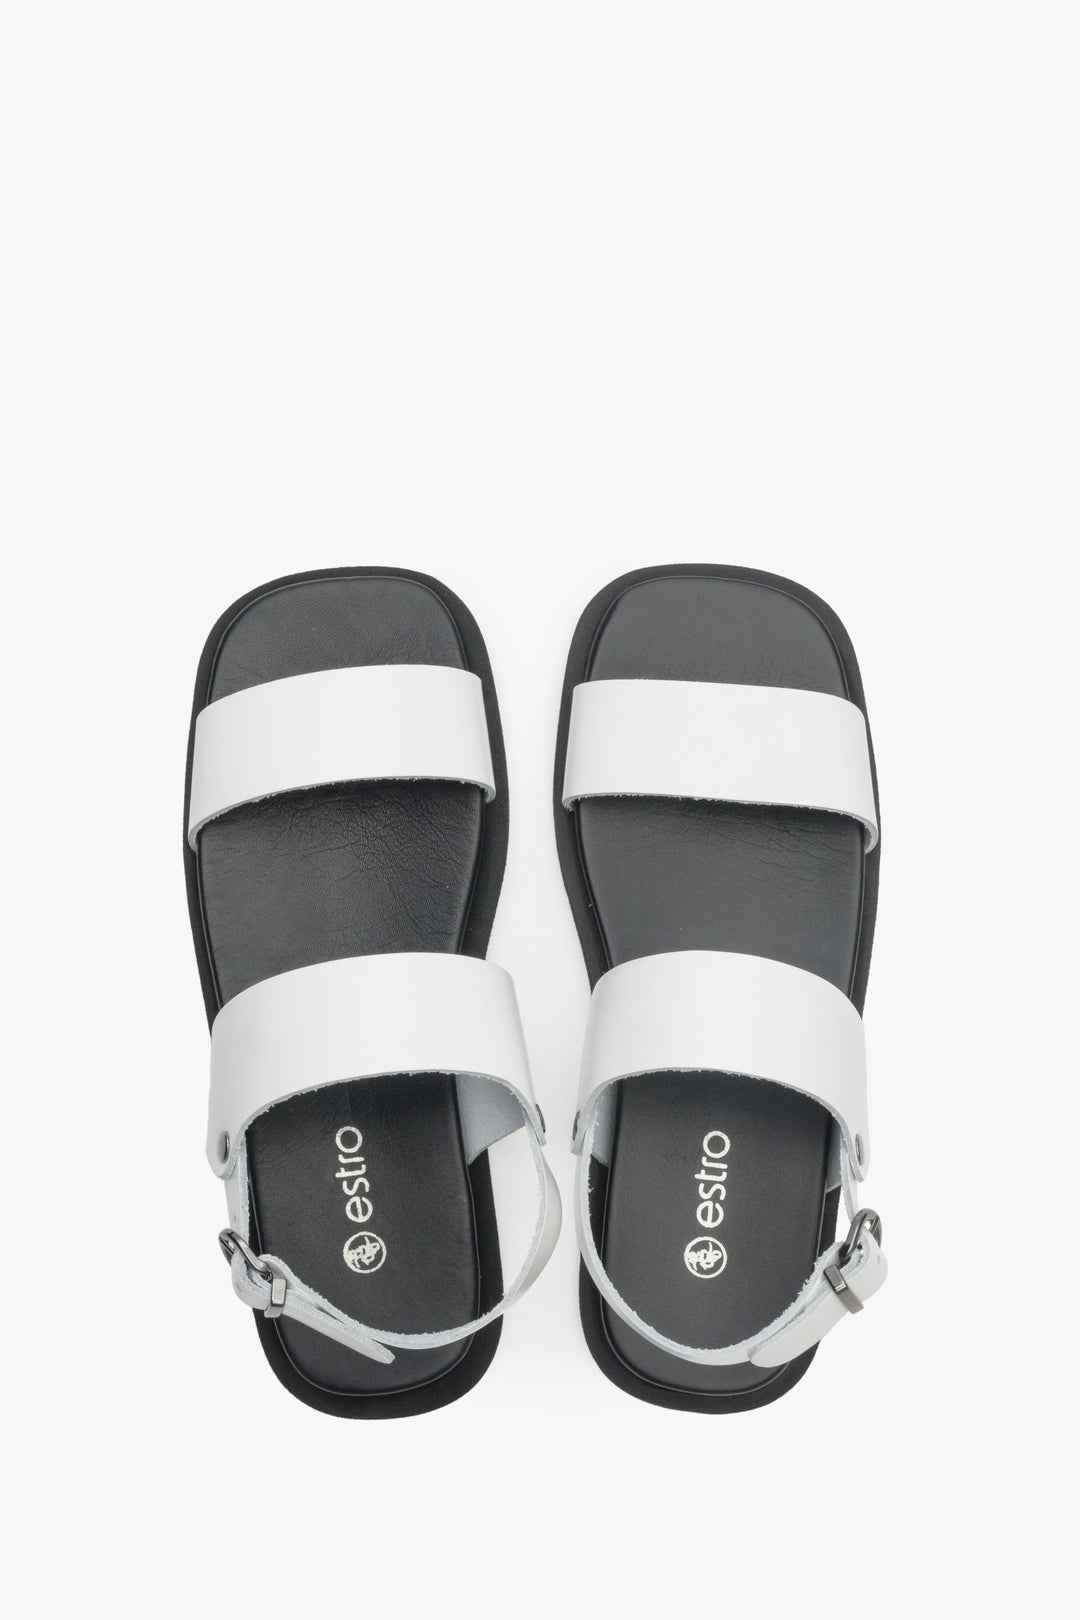 Women's sandals in white on a black flat sole Estro - footwear presentation from above.